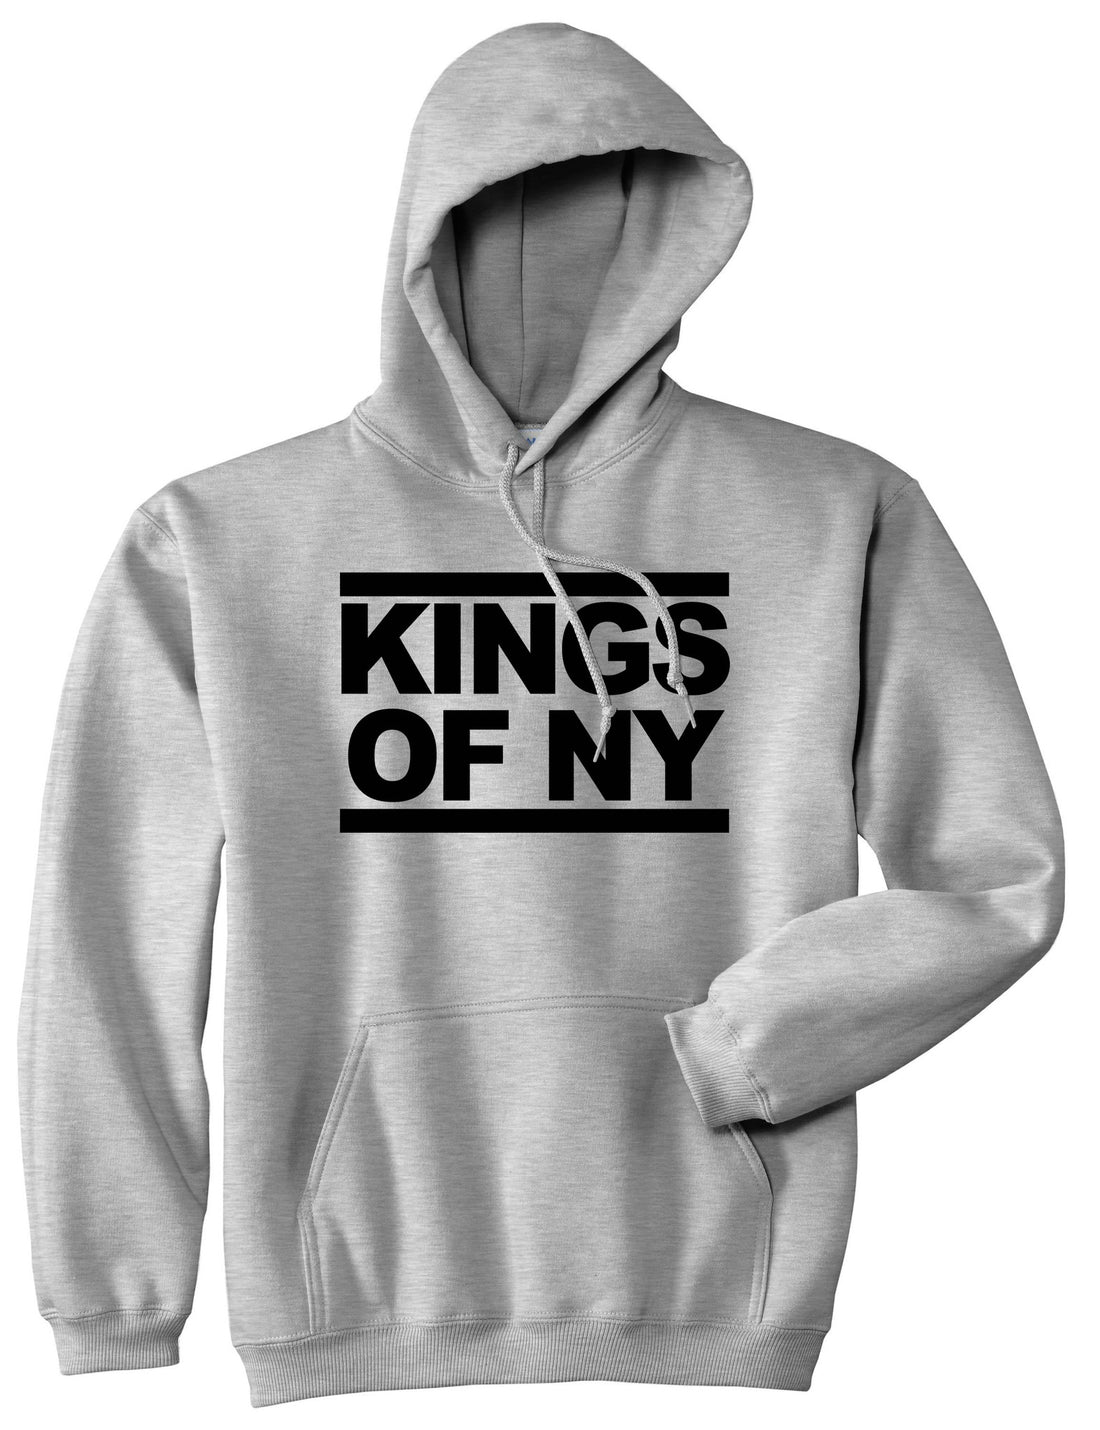 Kings Of NY Run DMC Logo Style Pullover Hoodie in Grey By Kings Of NY